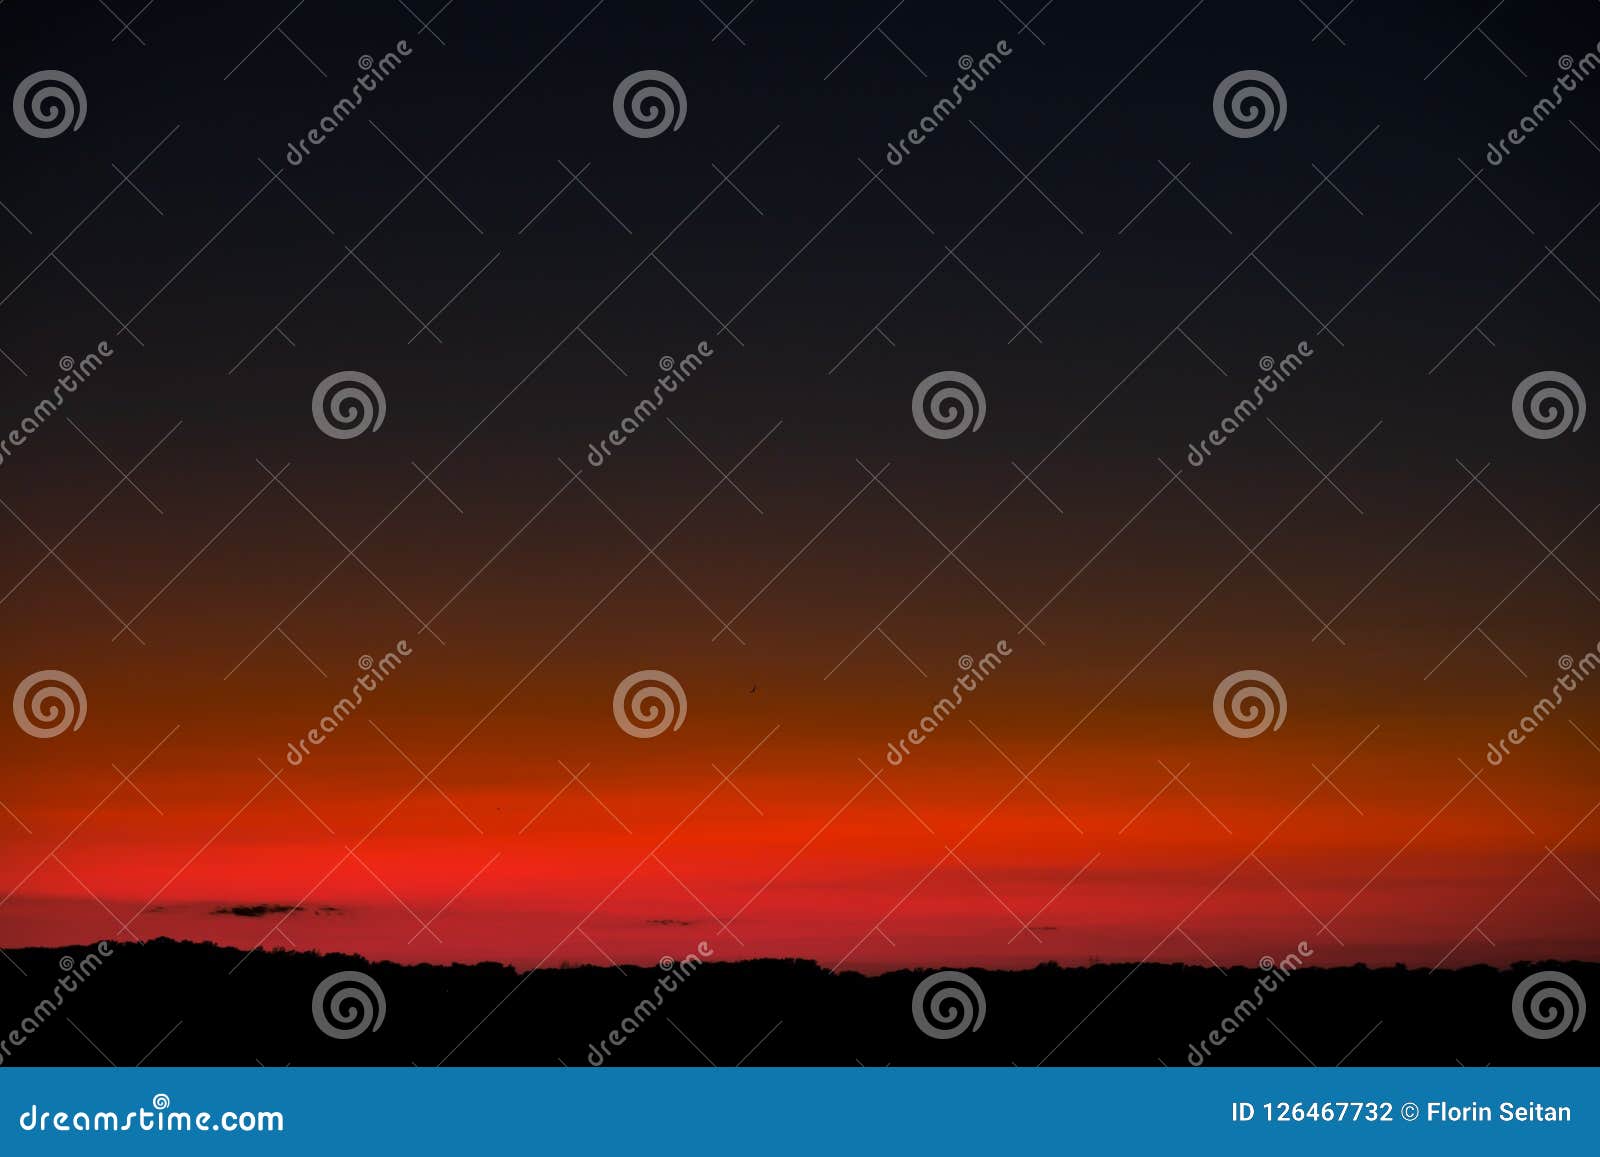 sunset sky with bright red horizon and crescent moon